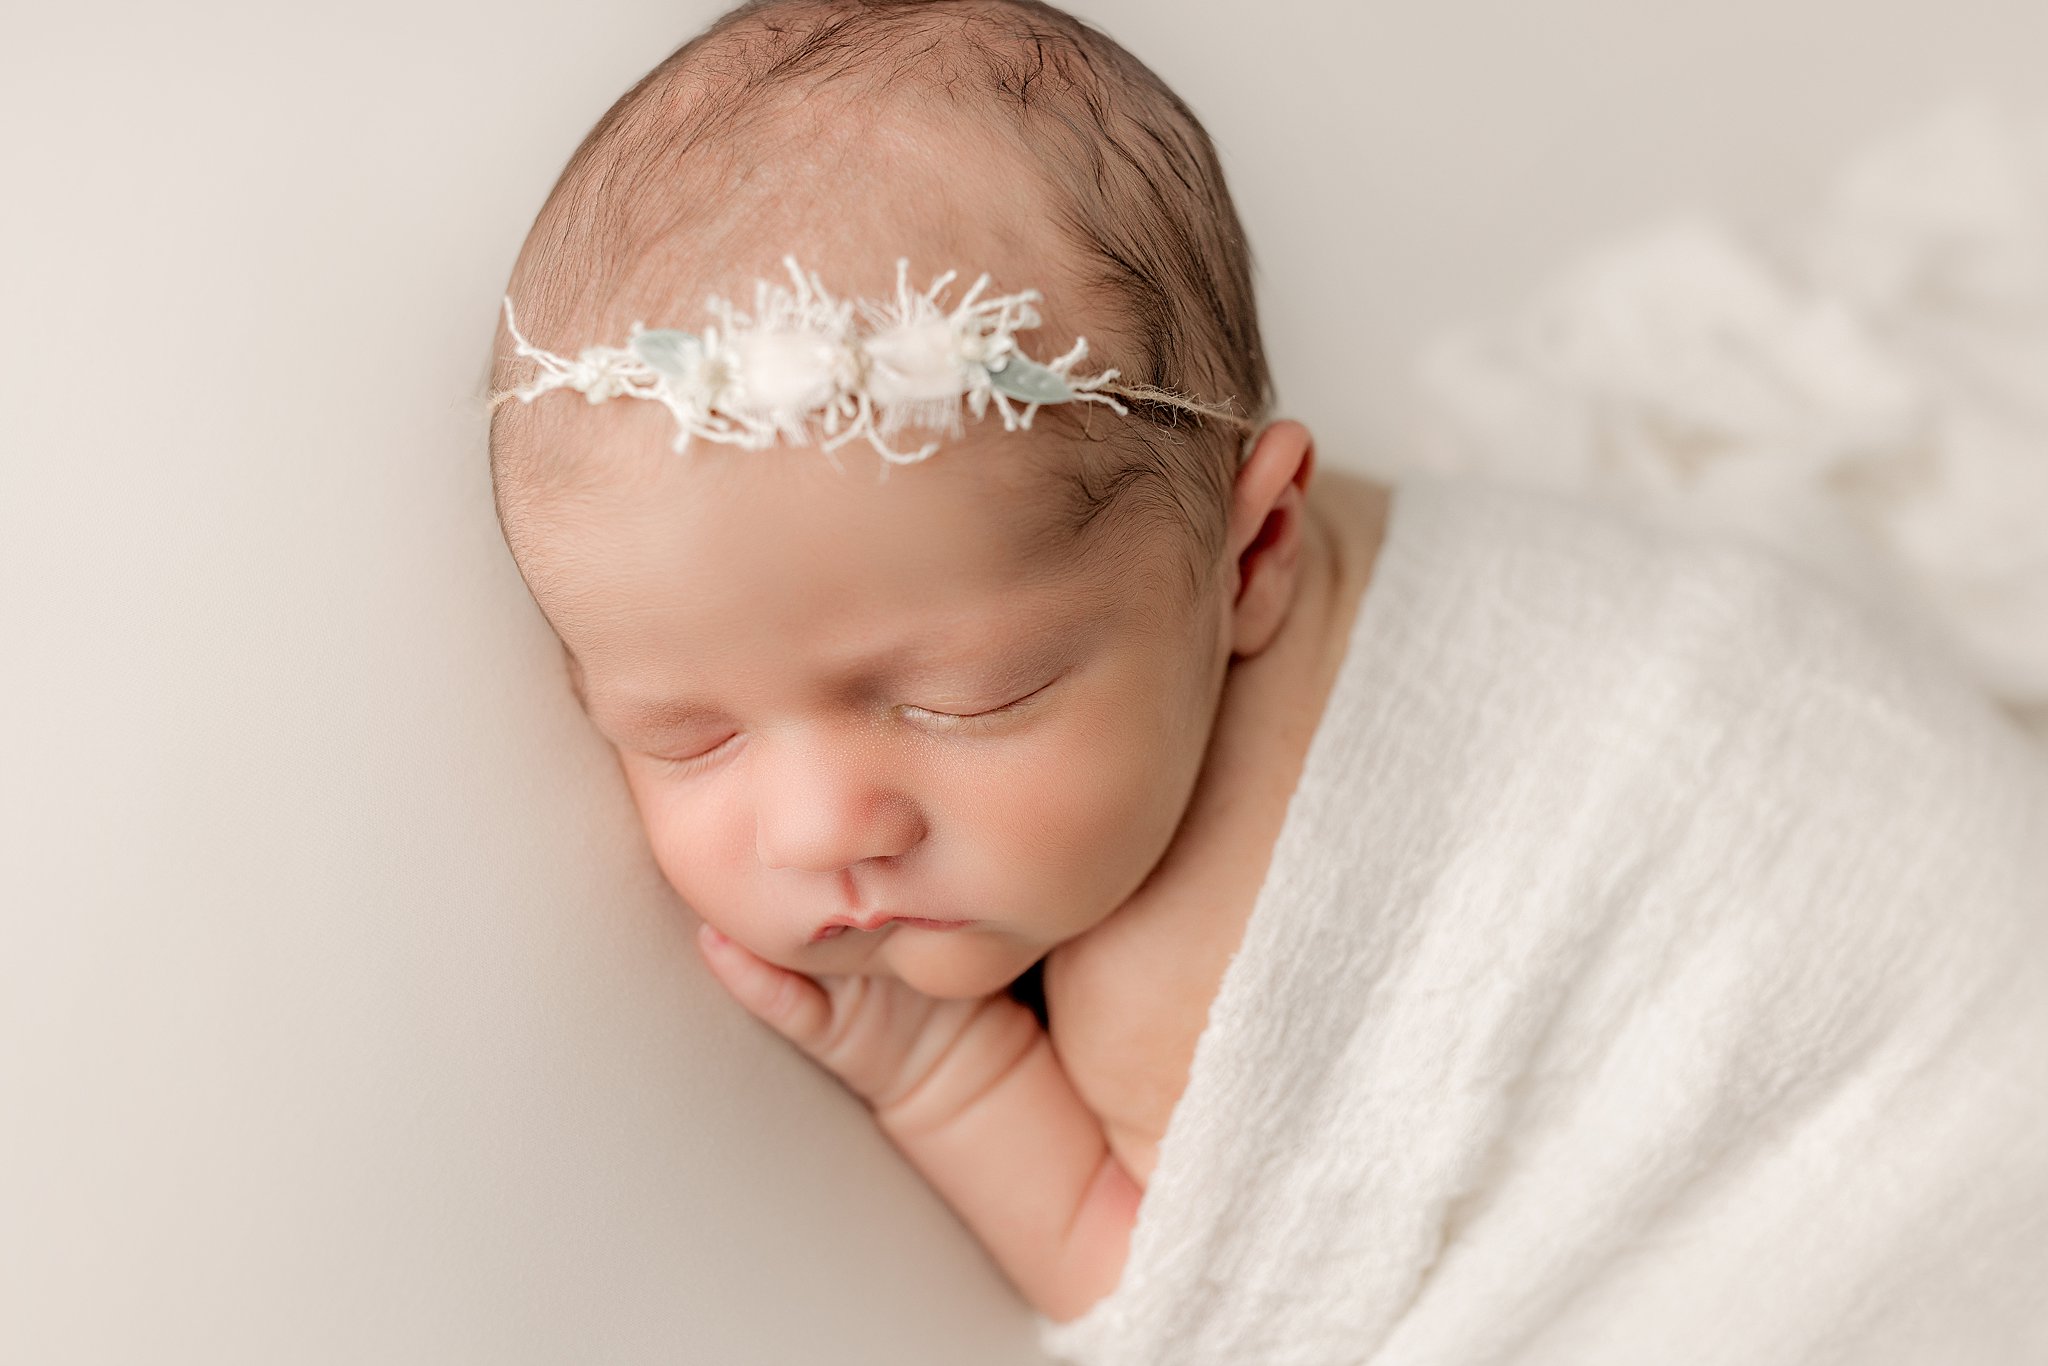 A newborn baby sleeps under a white blanket with a simple headband baby bloomers charleston